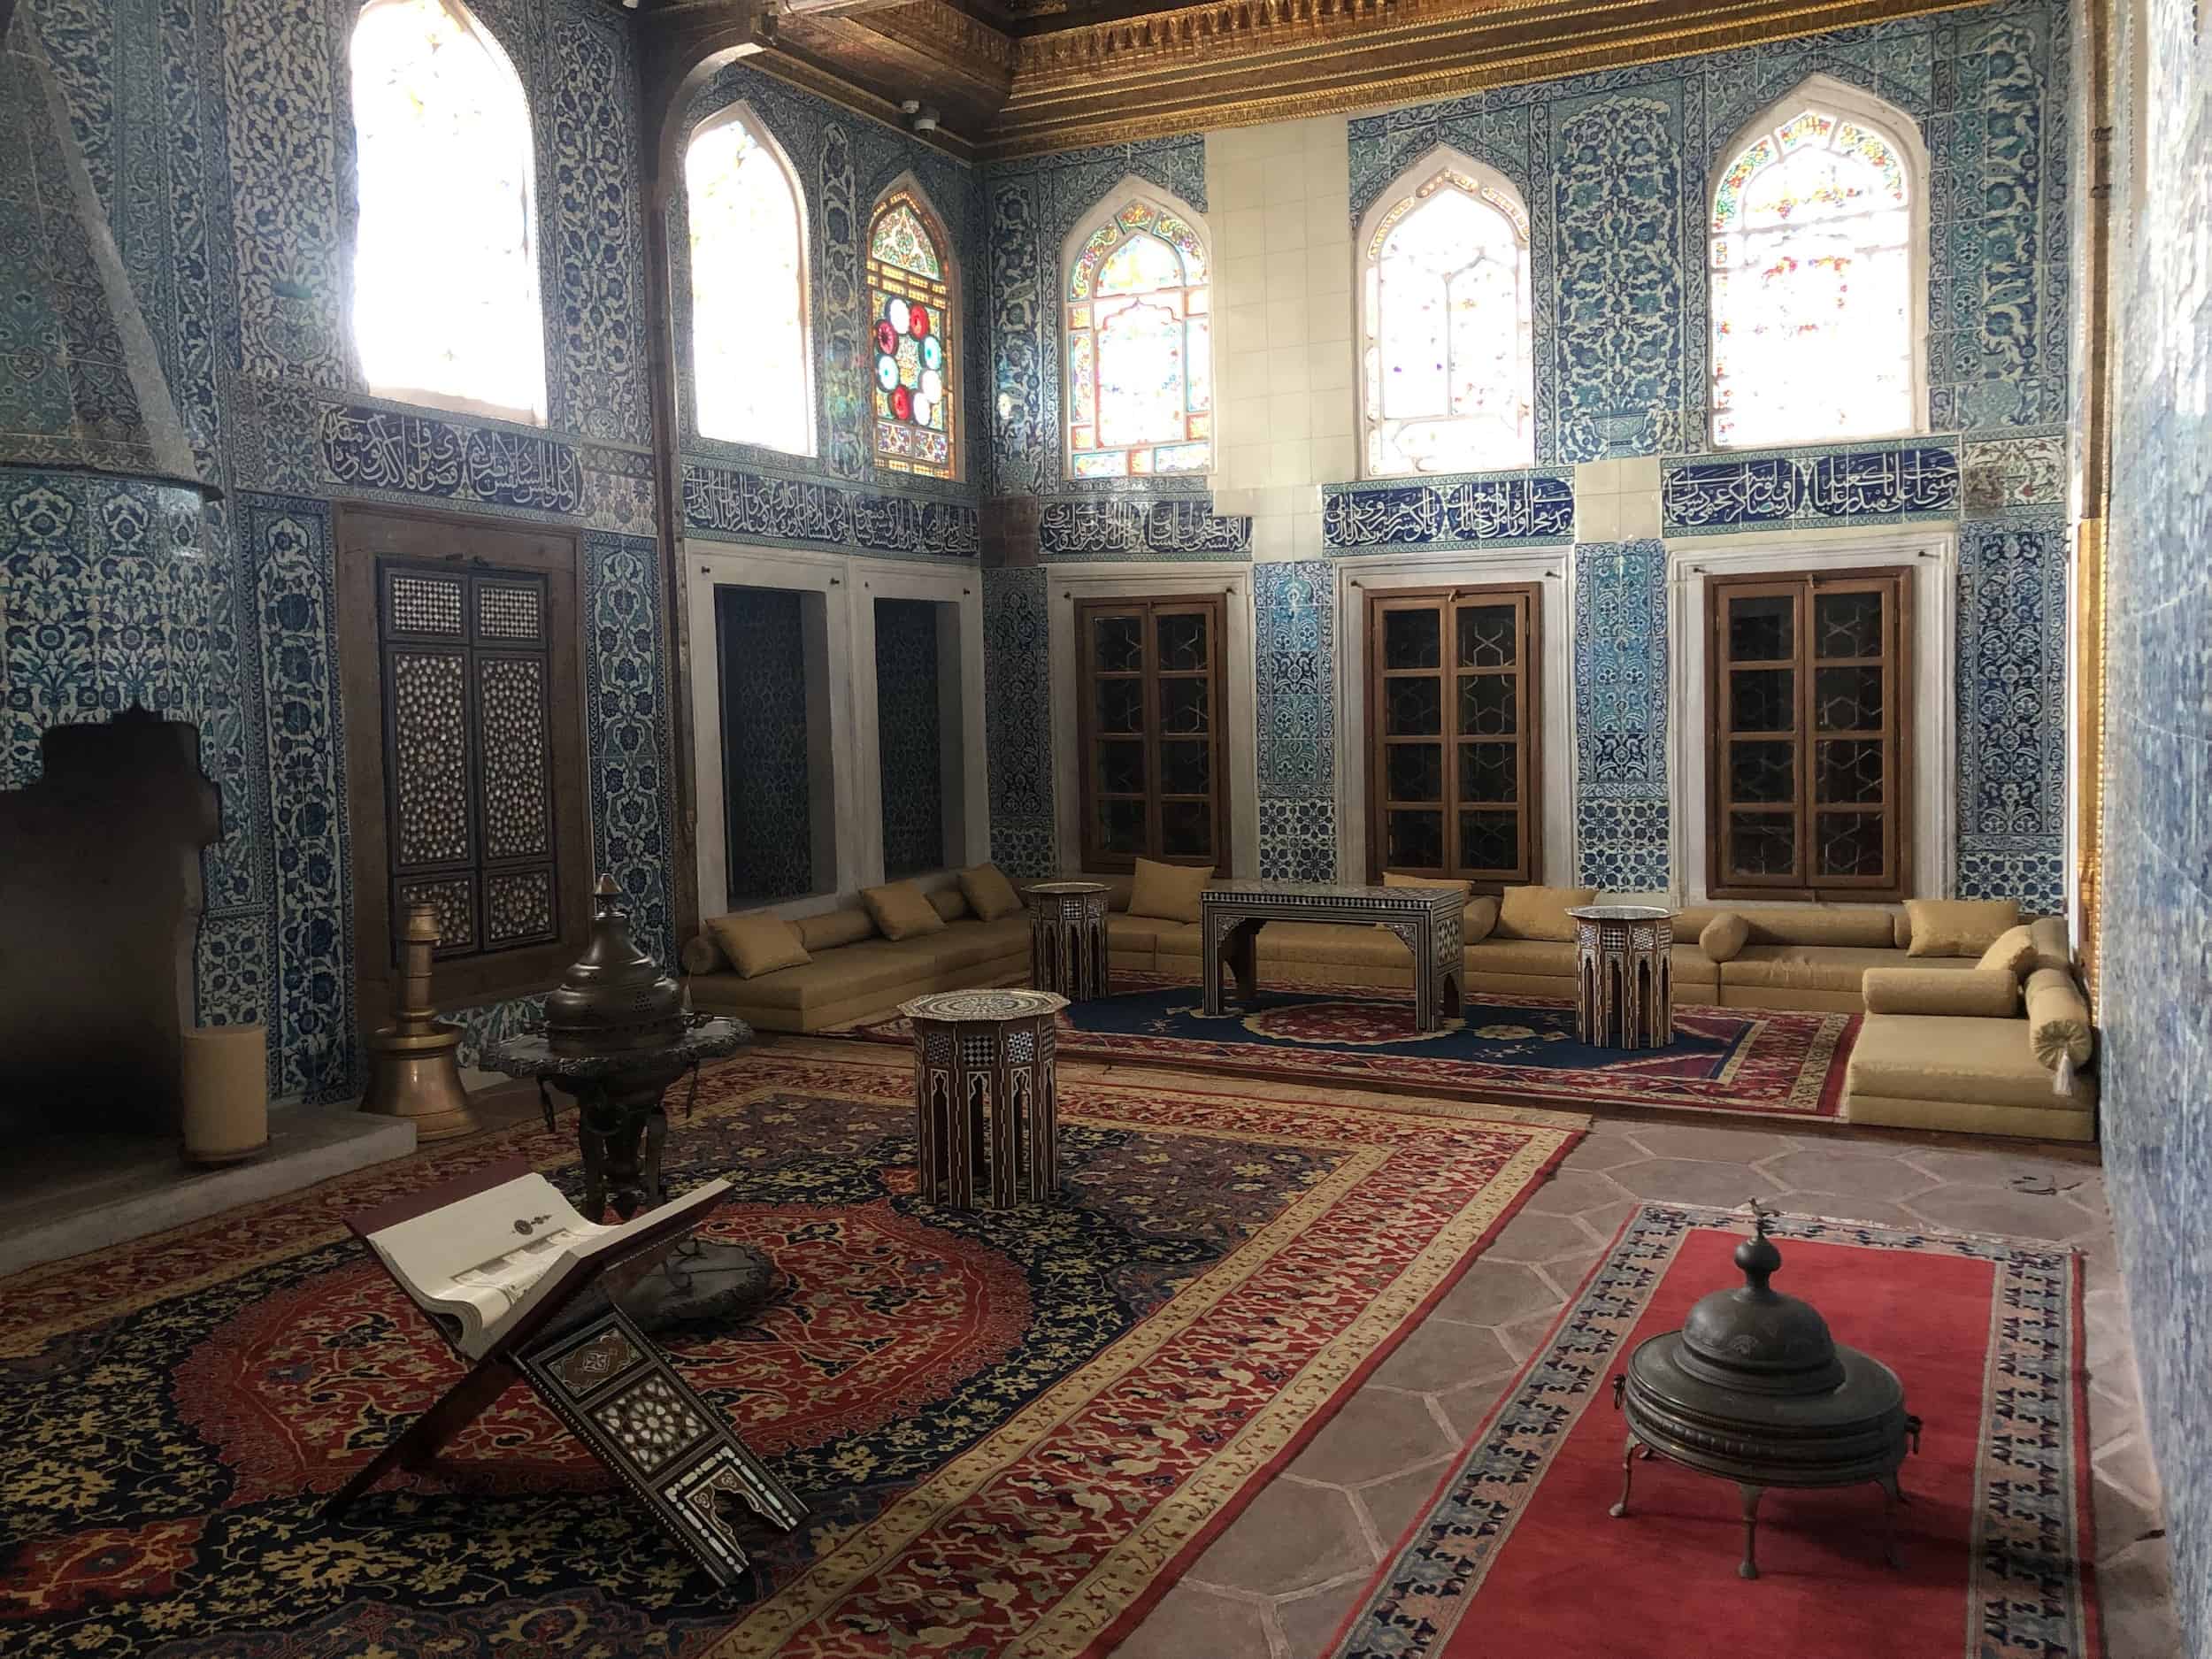 Main Room at the Sultan's Pavilion at the New Mosque in Eminönü, Istanbul, Turkey